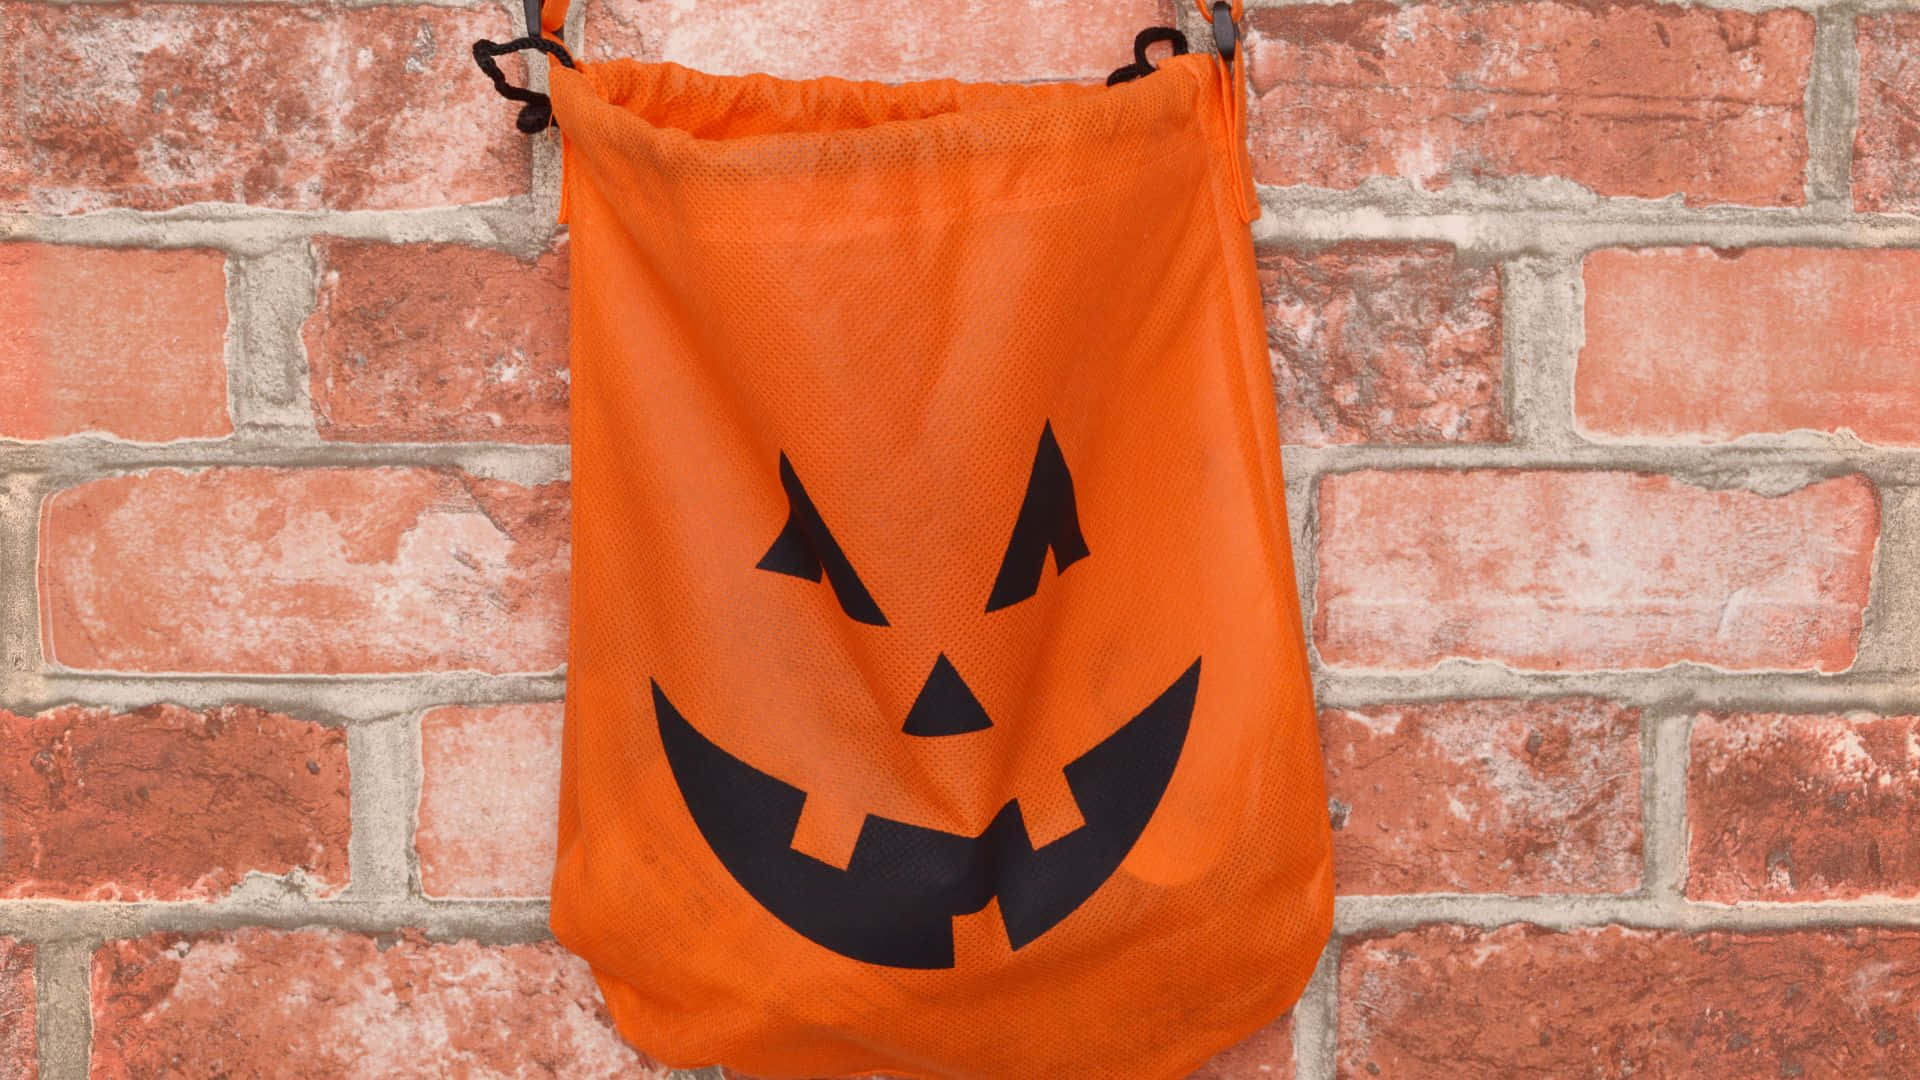 A pile of colorful Trick or Treat bags ready for Halloween night Wallpaper